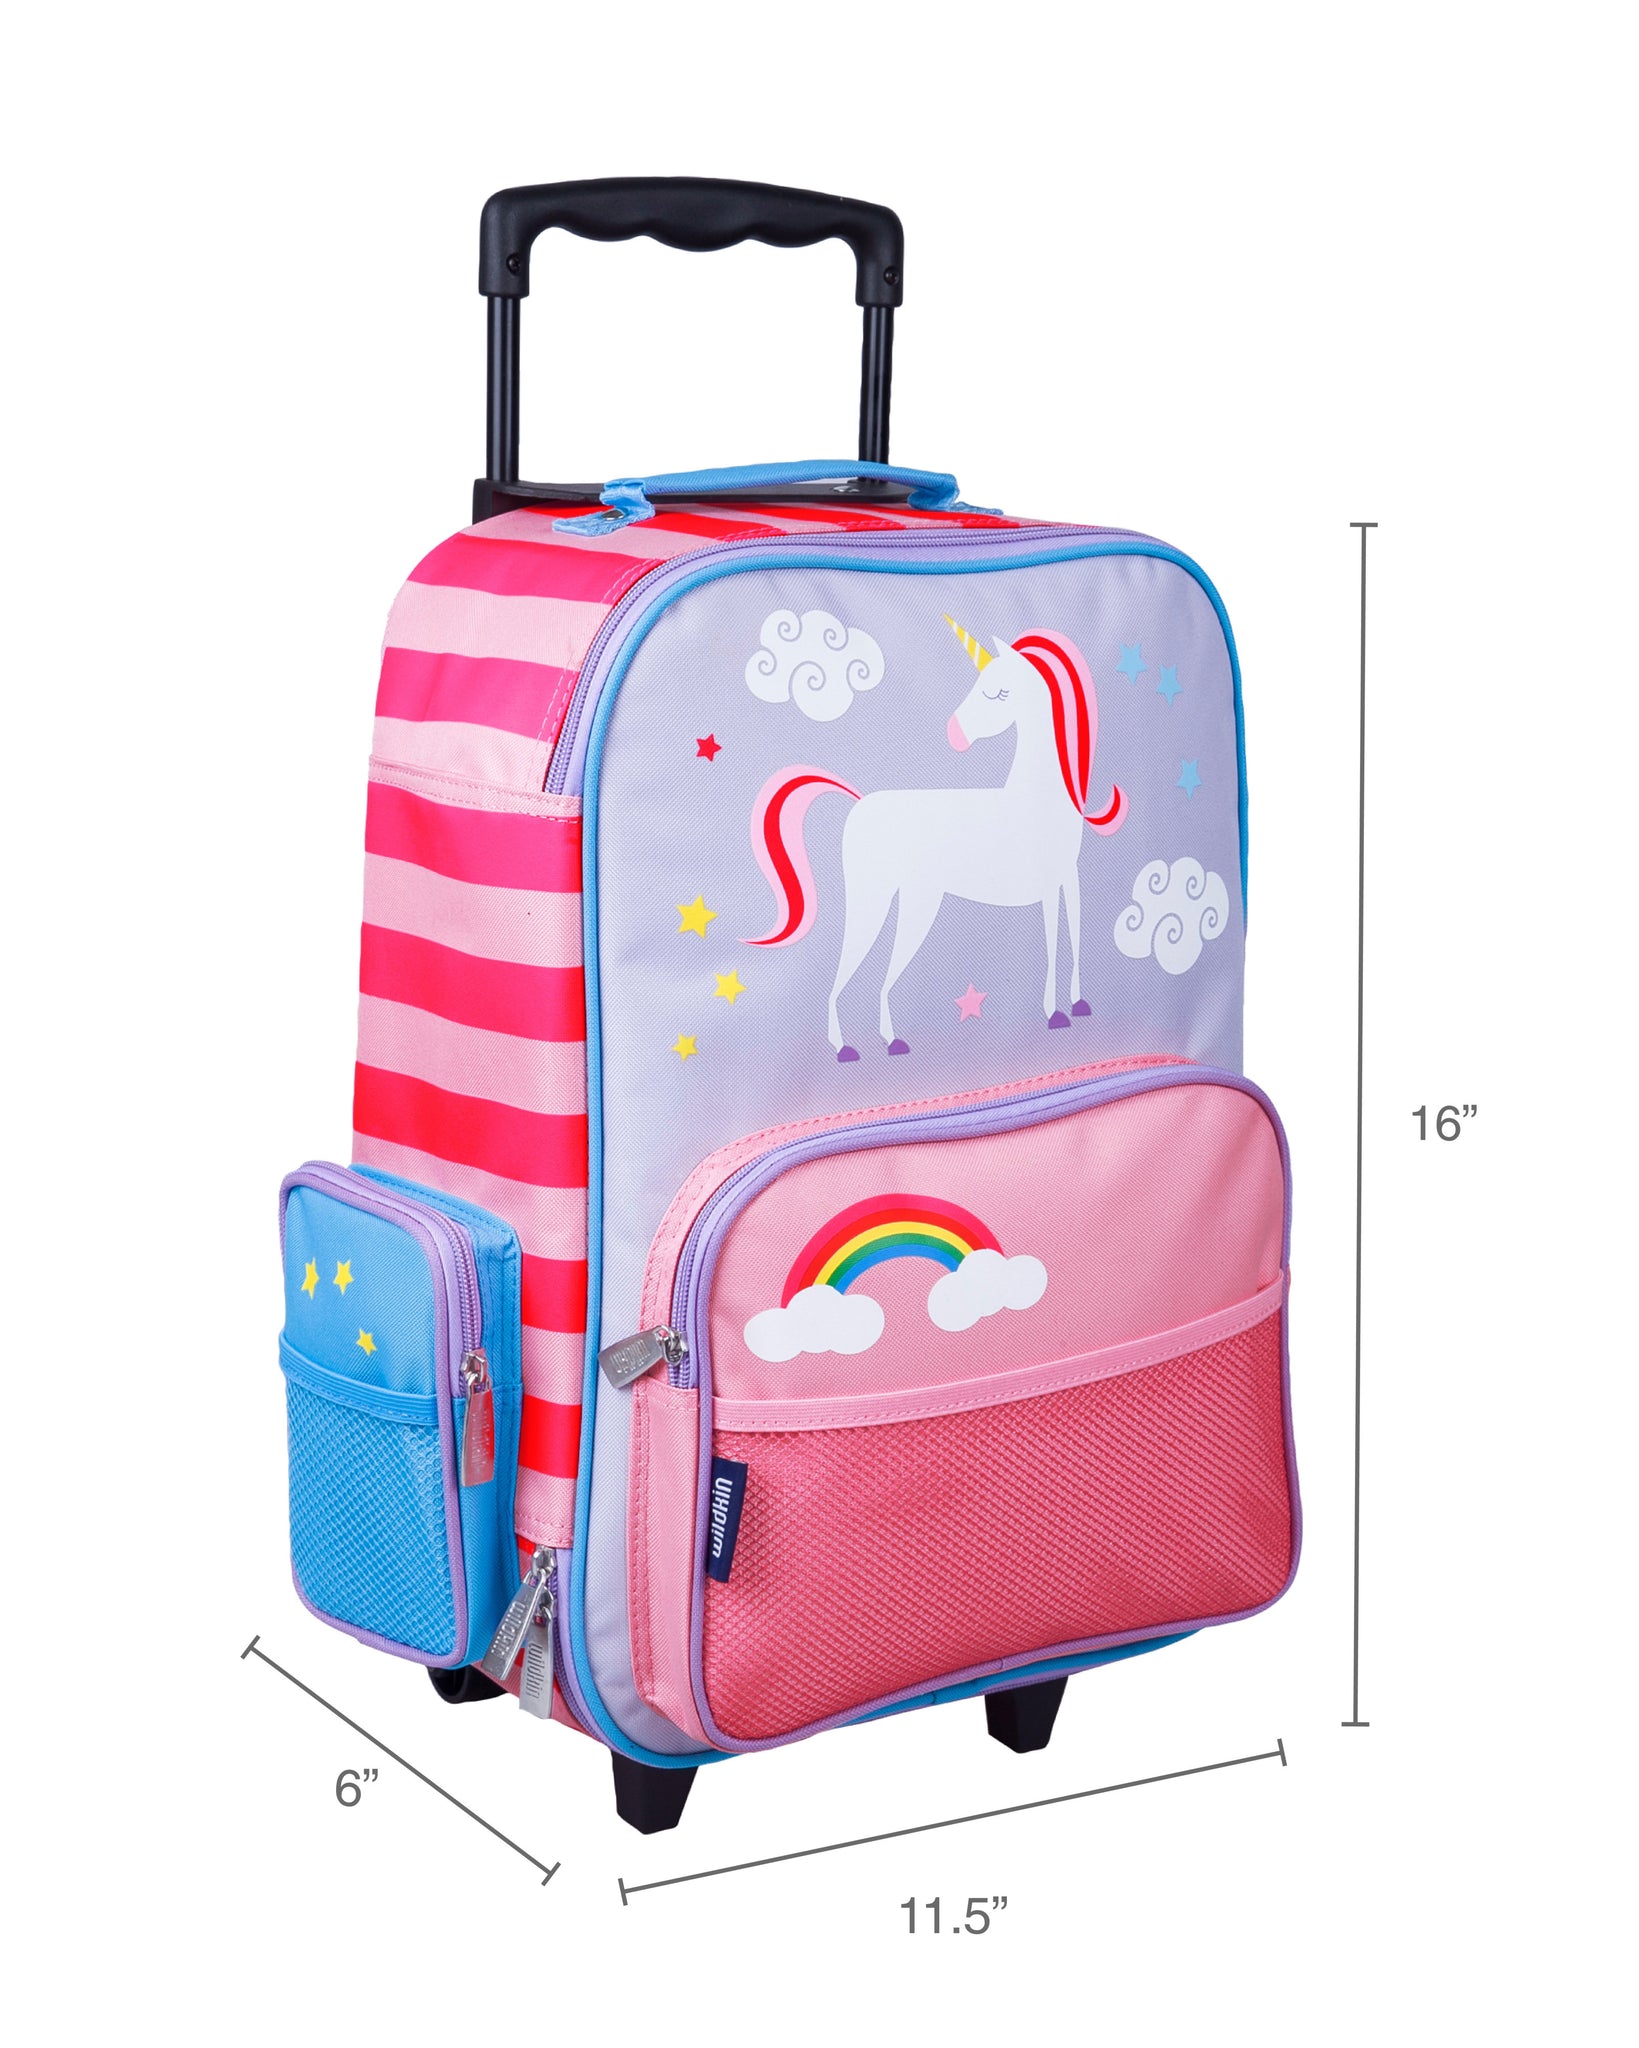 Swarn Products Swarn Polycarbonate Unicorn Travel Suitcase Trolley Bag for  Kids (Pink-0502)) Expandable Cabin Suitcase - 18 inch Pink - Price in India  | Flipkart.com